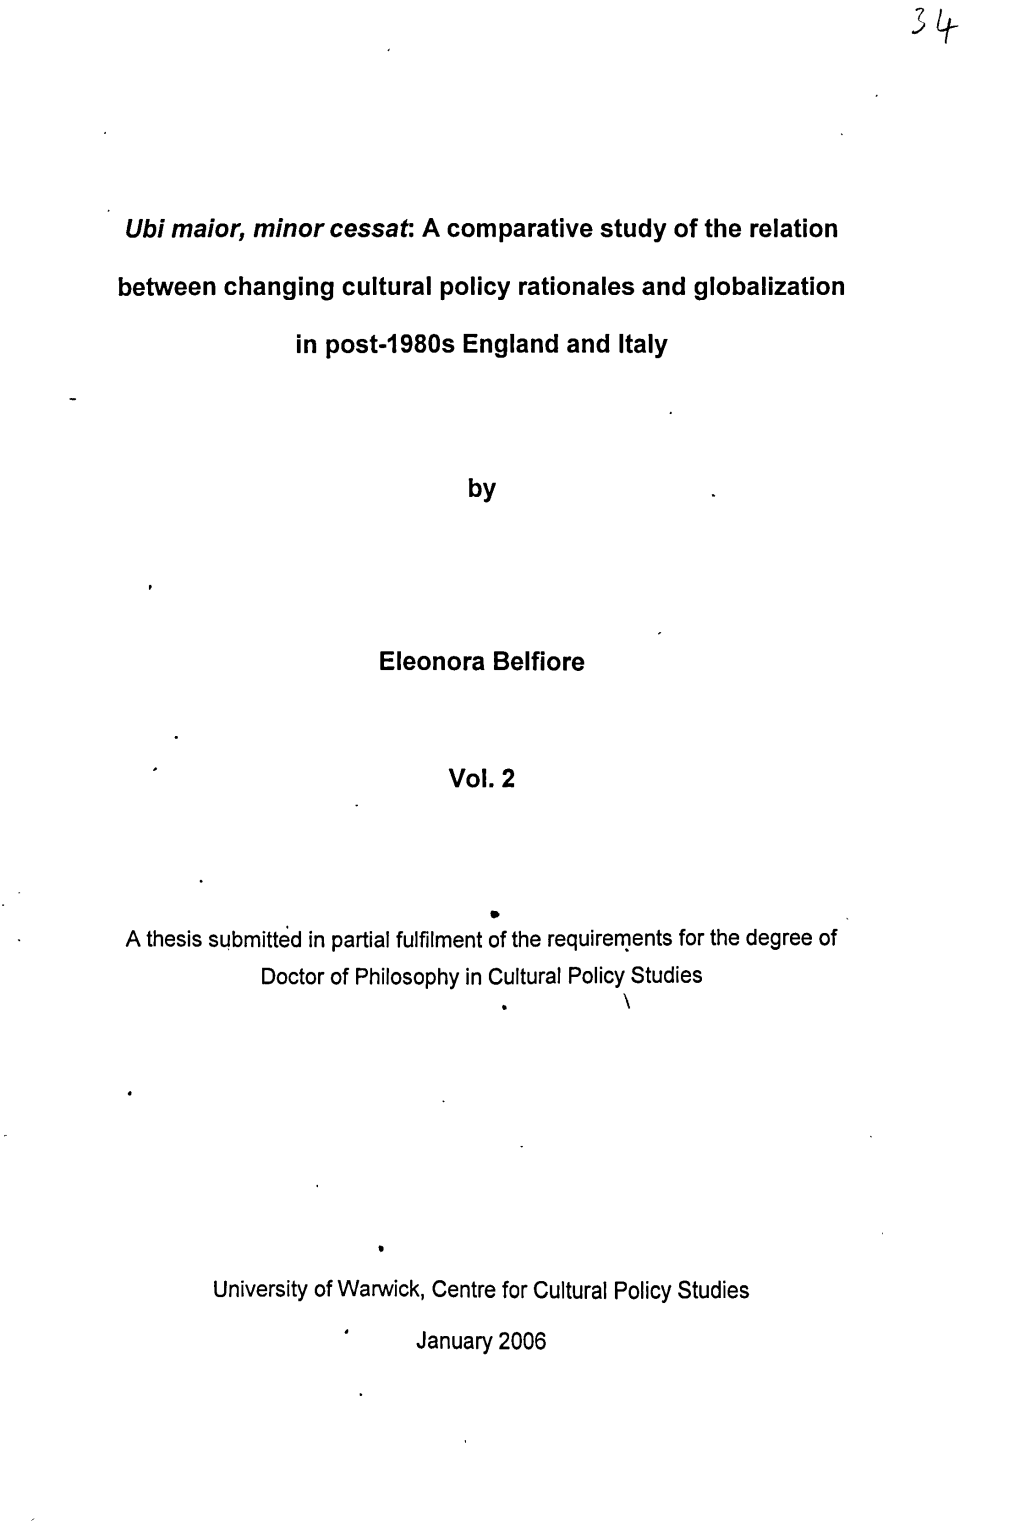 A Comparative Study of the Relation Between Changing Cultural Policy Rationales and Globalization in Po